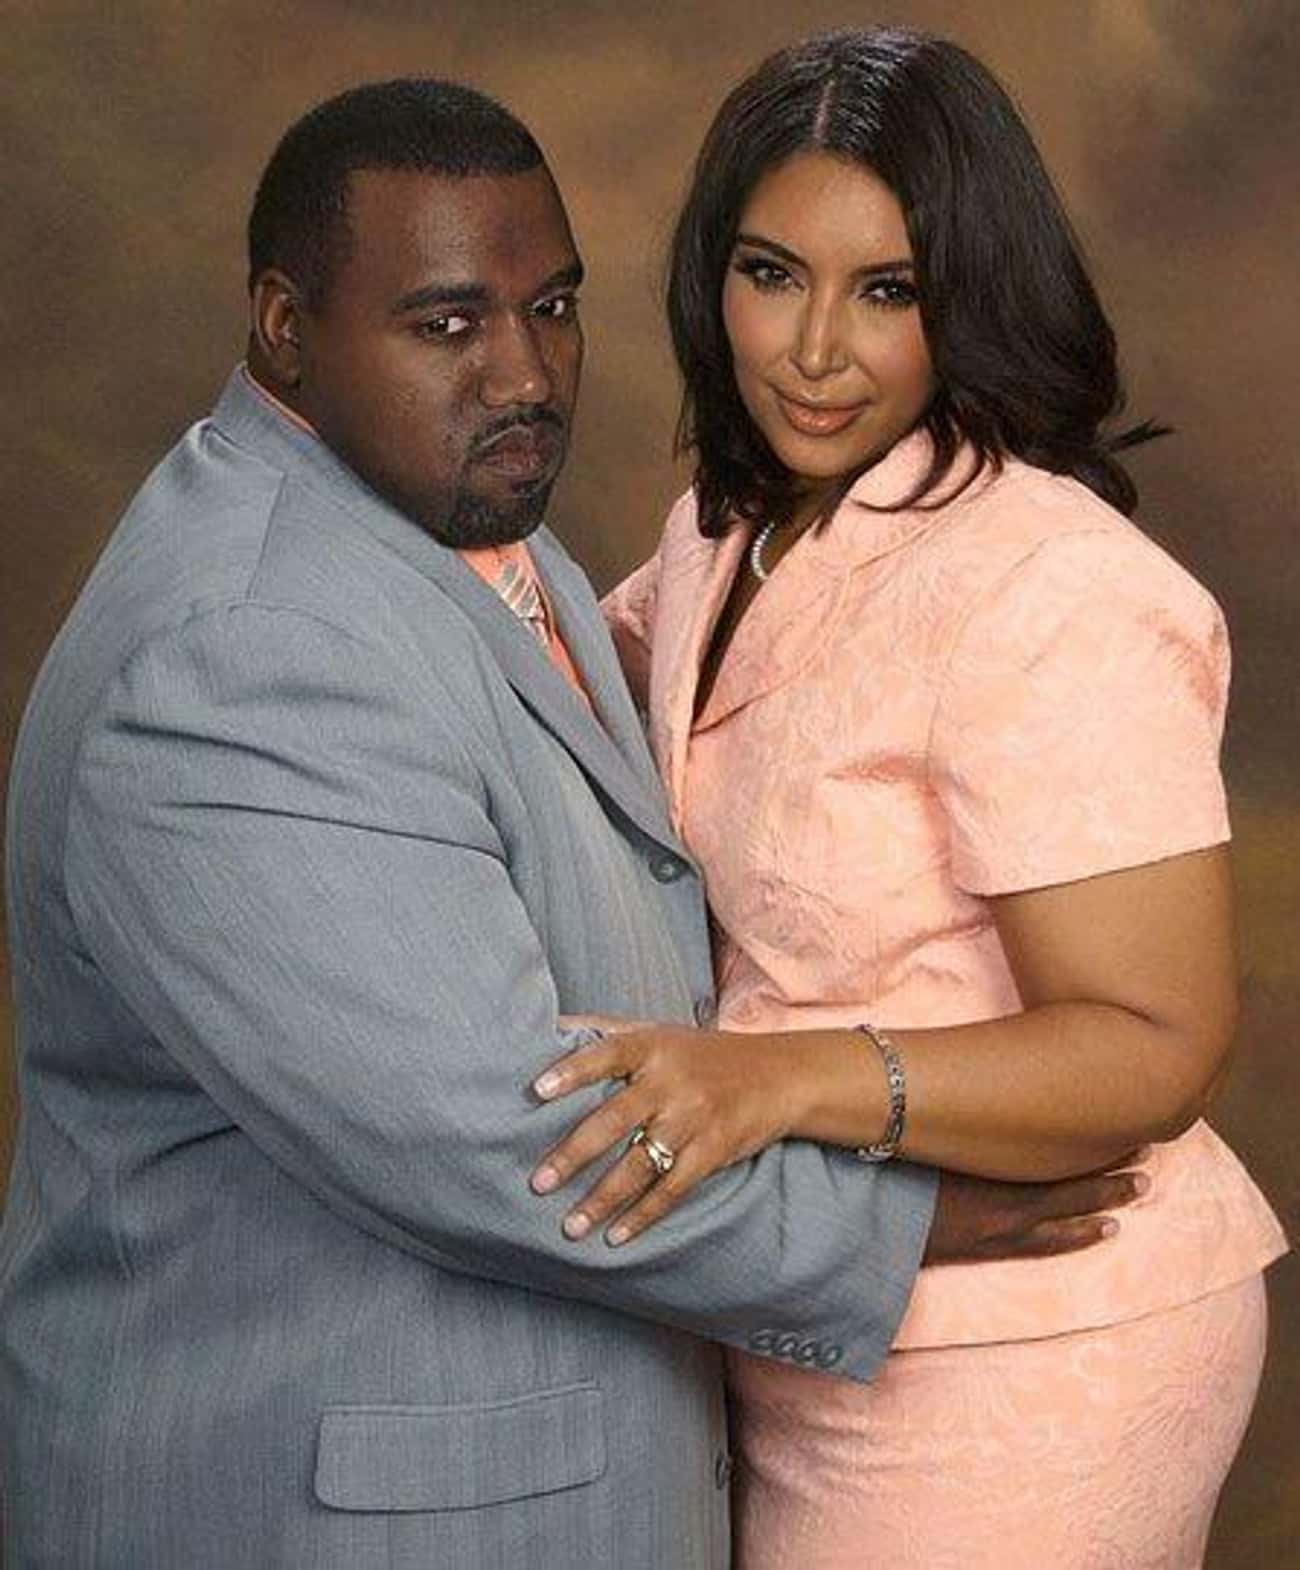 Midwest Kim and Kanye